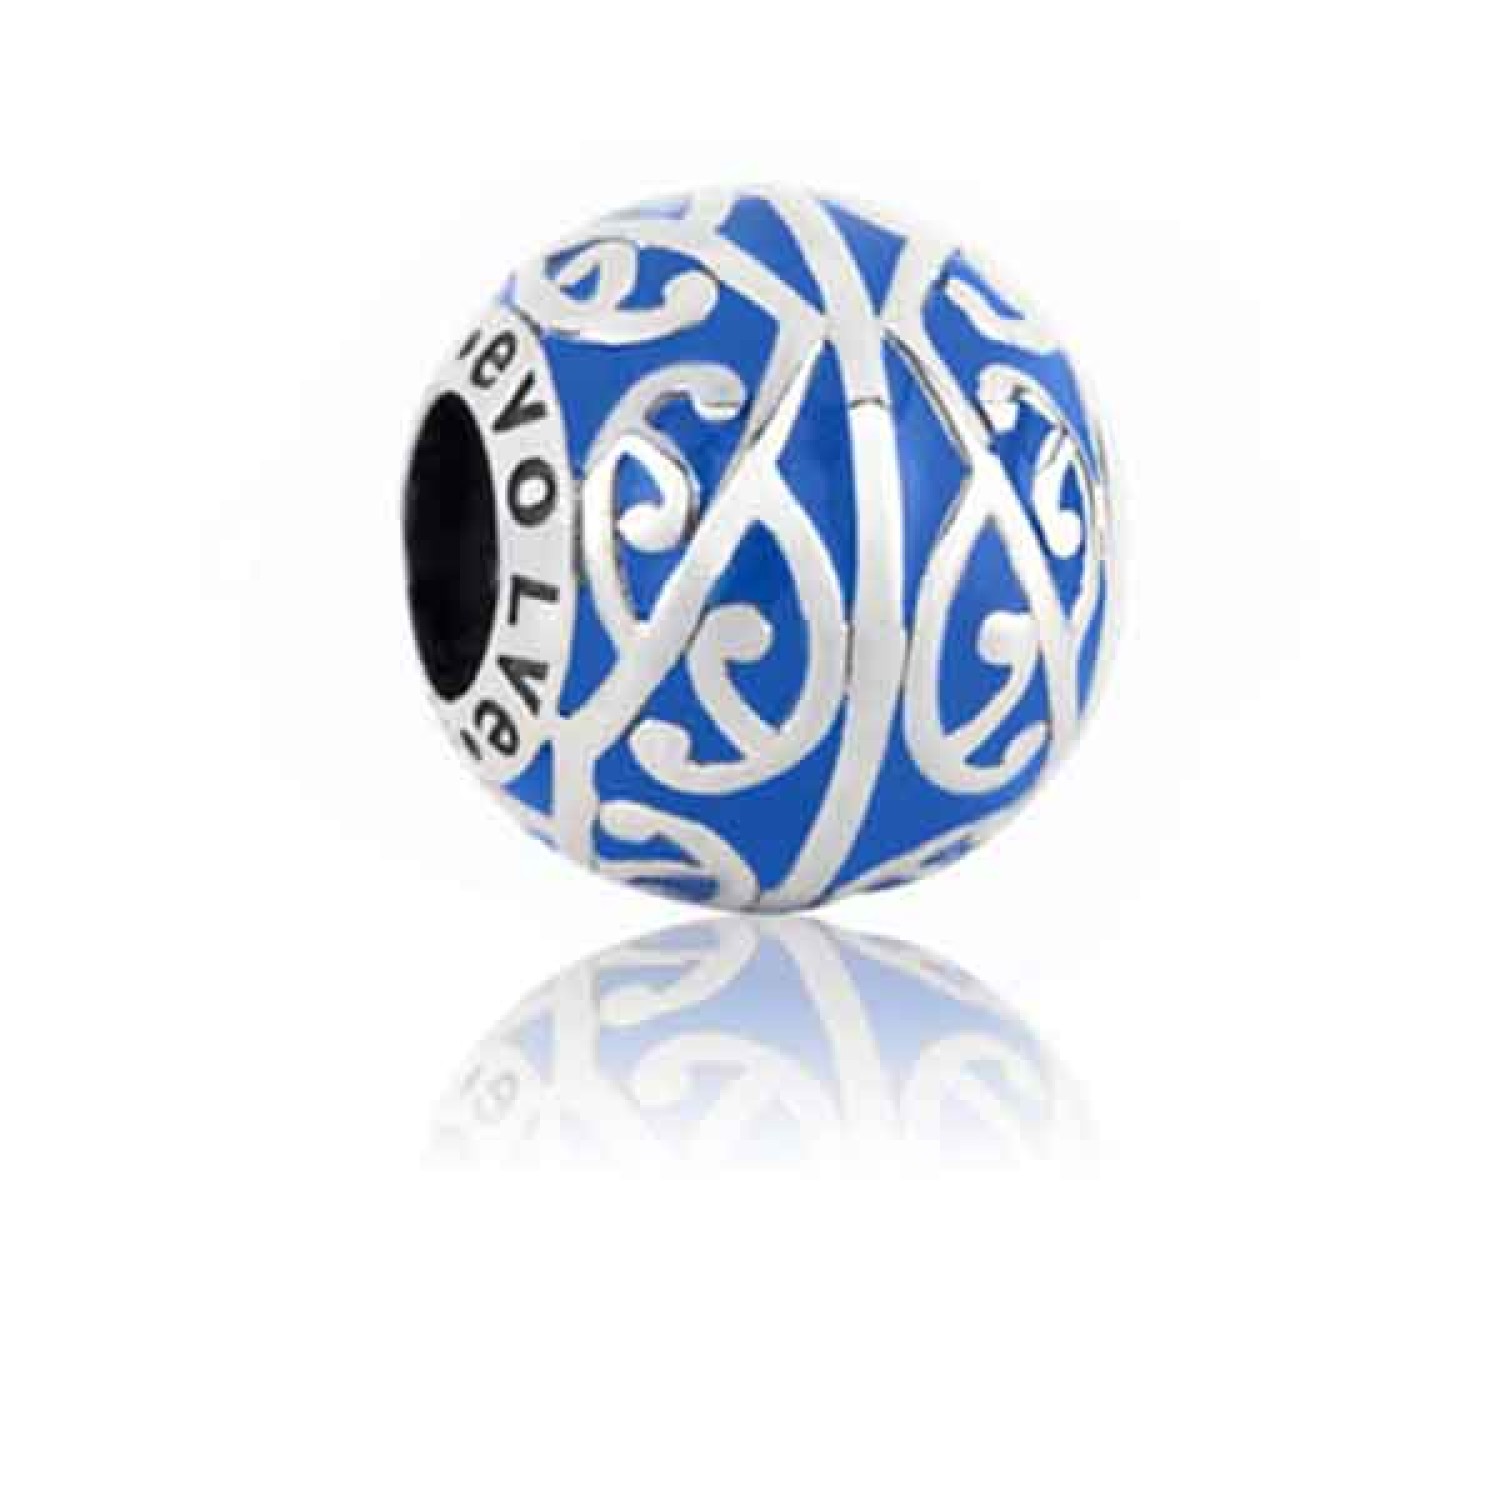 LKE054 Evolve New Zealand Ocean Tide Charm. Inspired by the everchanging ocean tides, this charm showcases beautiful rolling silver kowhaiwhai patterns and exquisite ocean blue enamel. Tides teach us to embrace change as they drift in and out and act as a